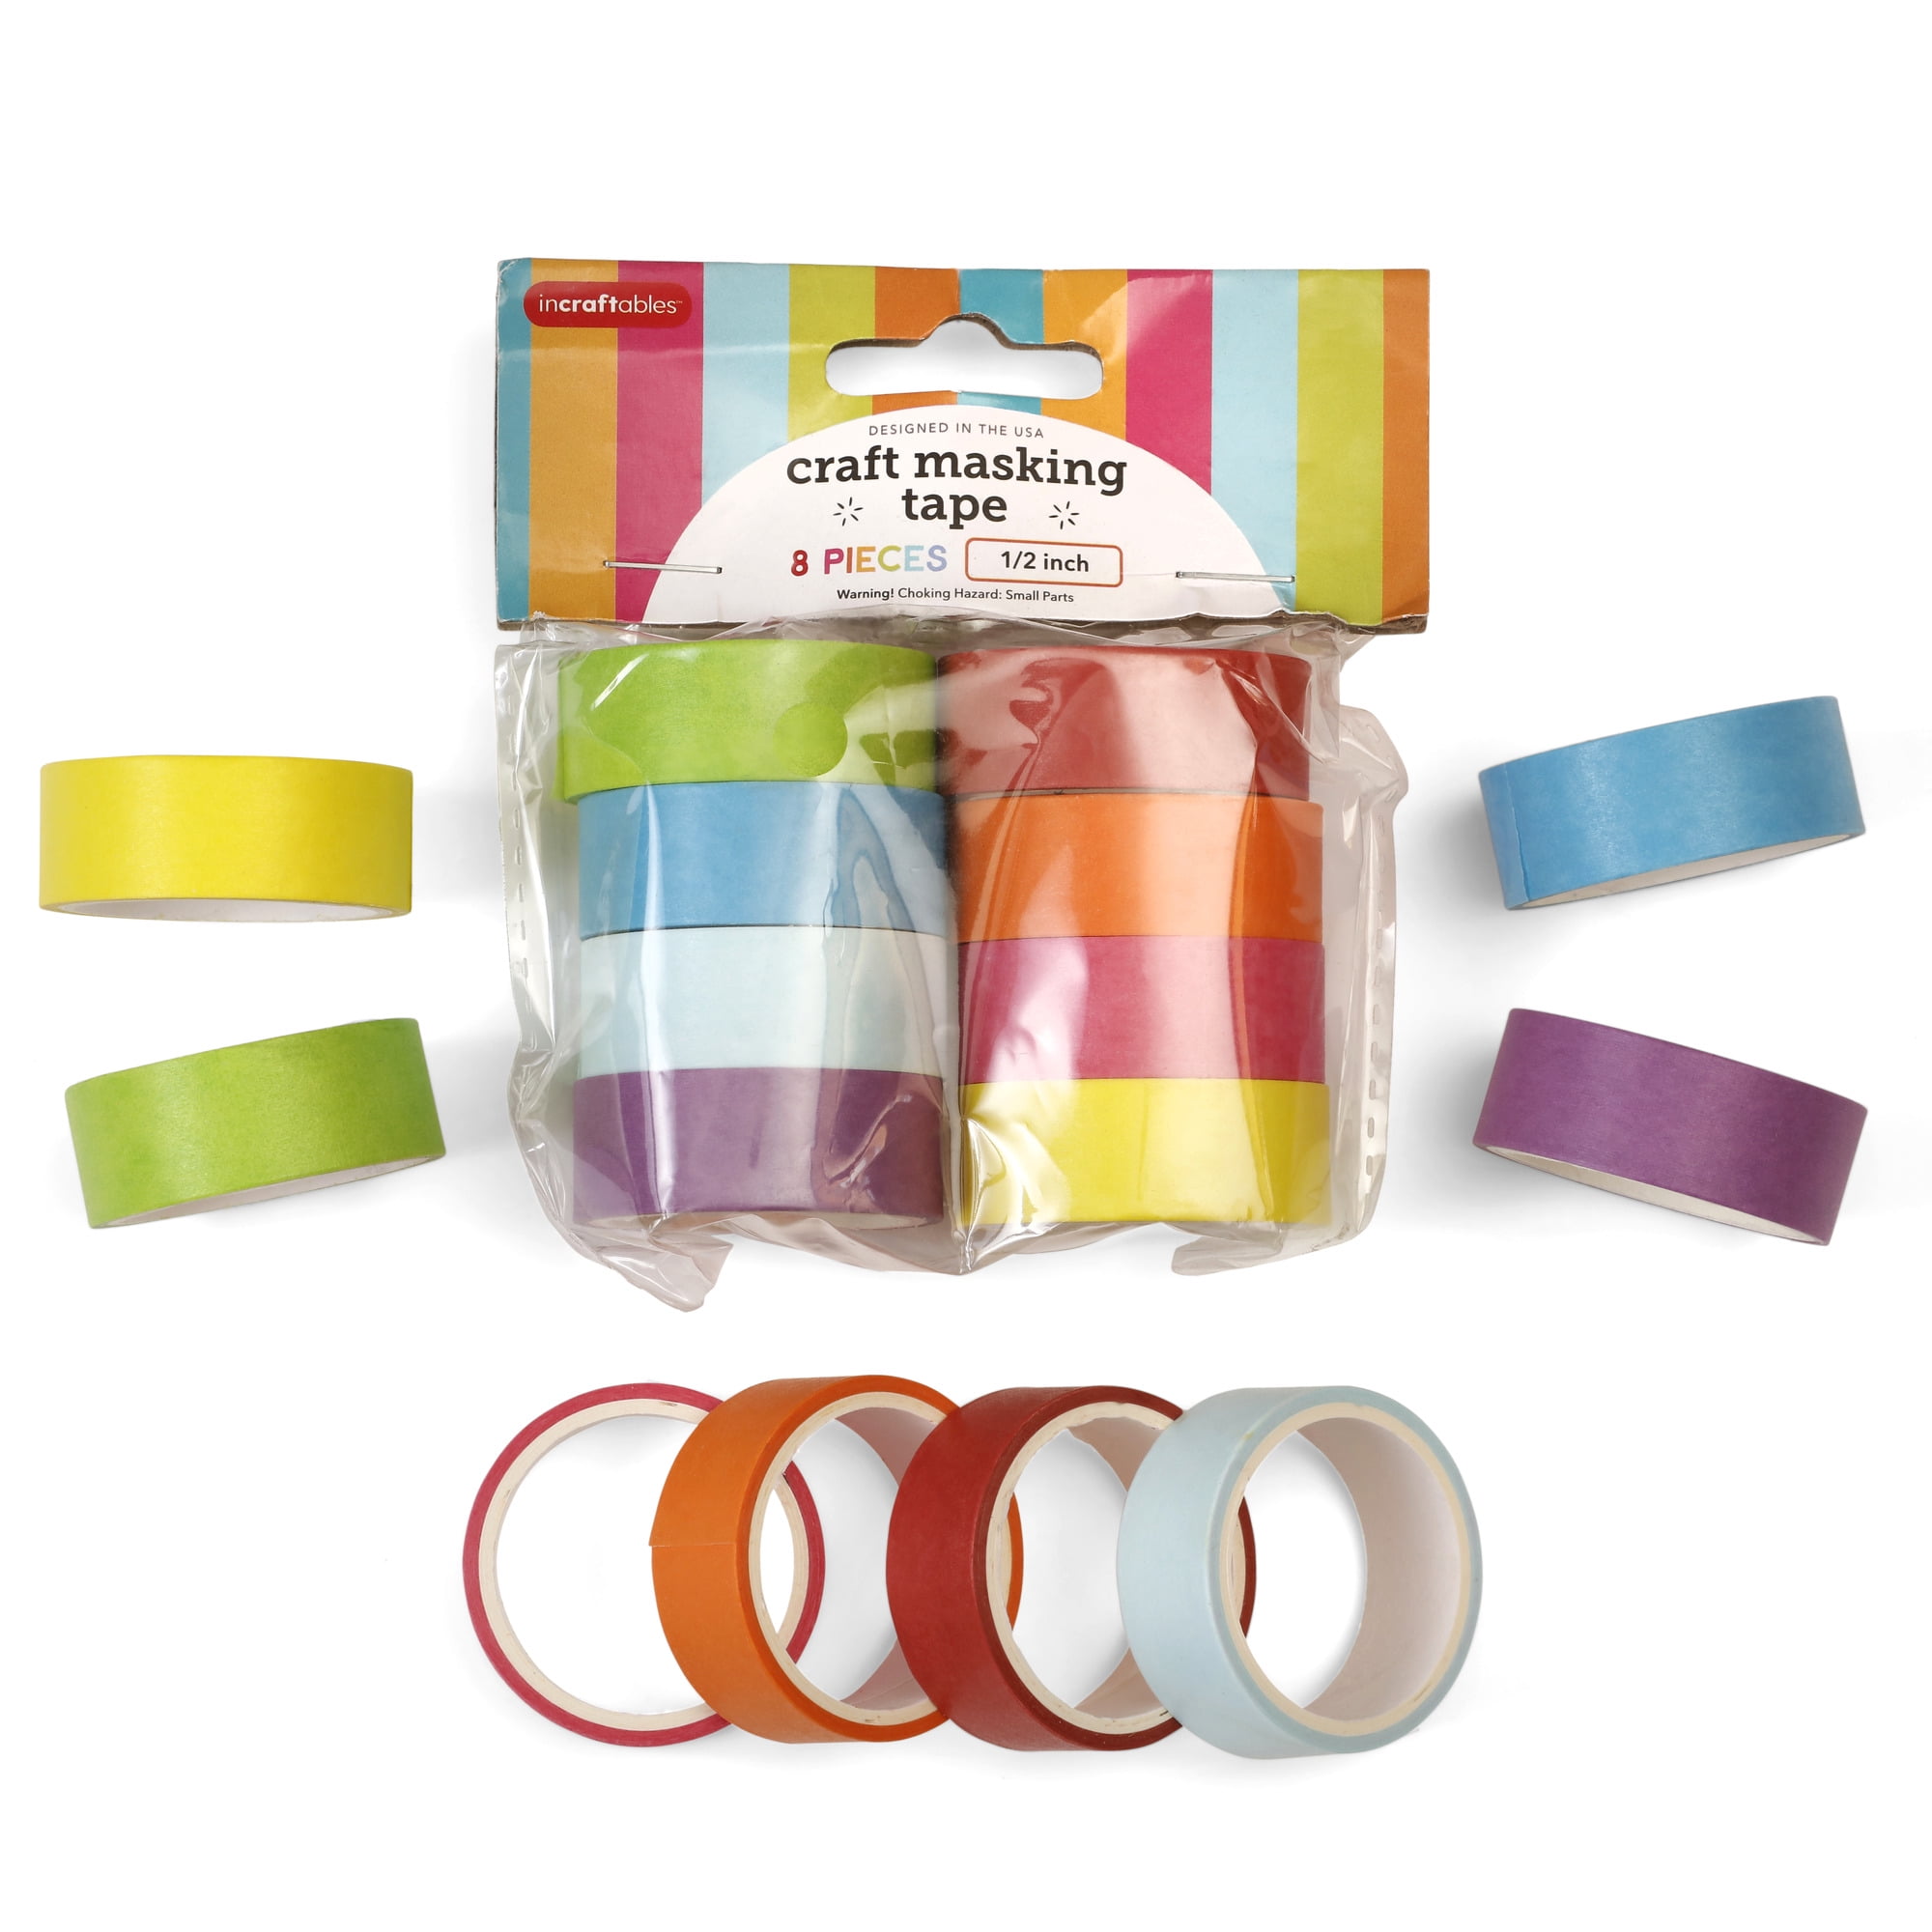 Guirnd 12PCS Colored Masking Tape, Kids Art Supplies Colored Tape